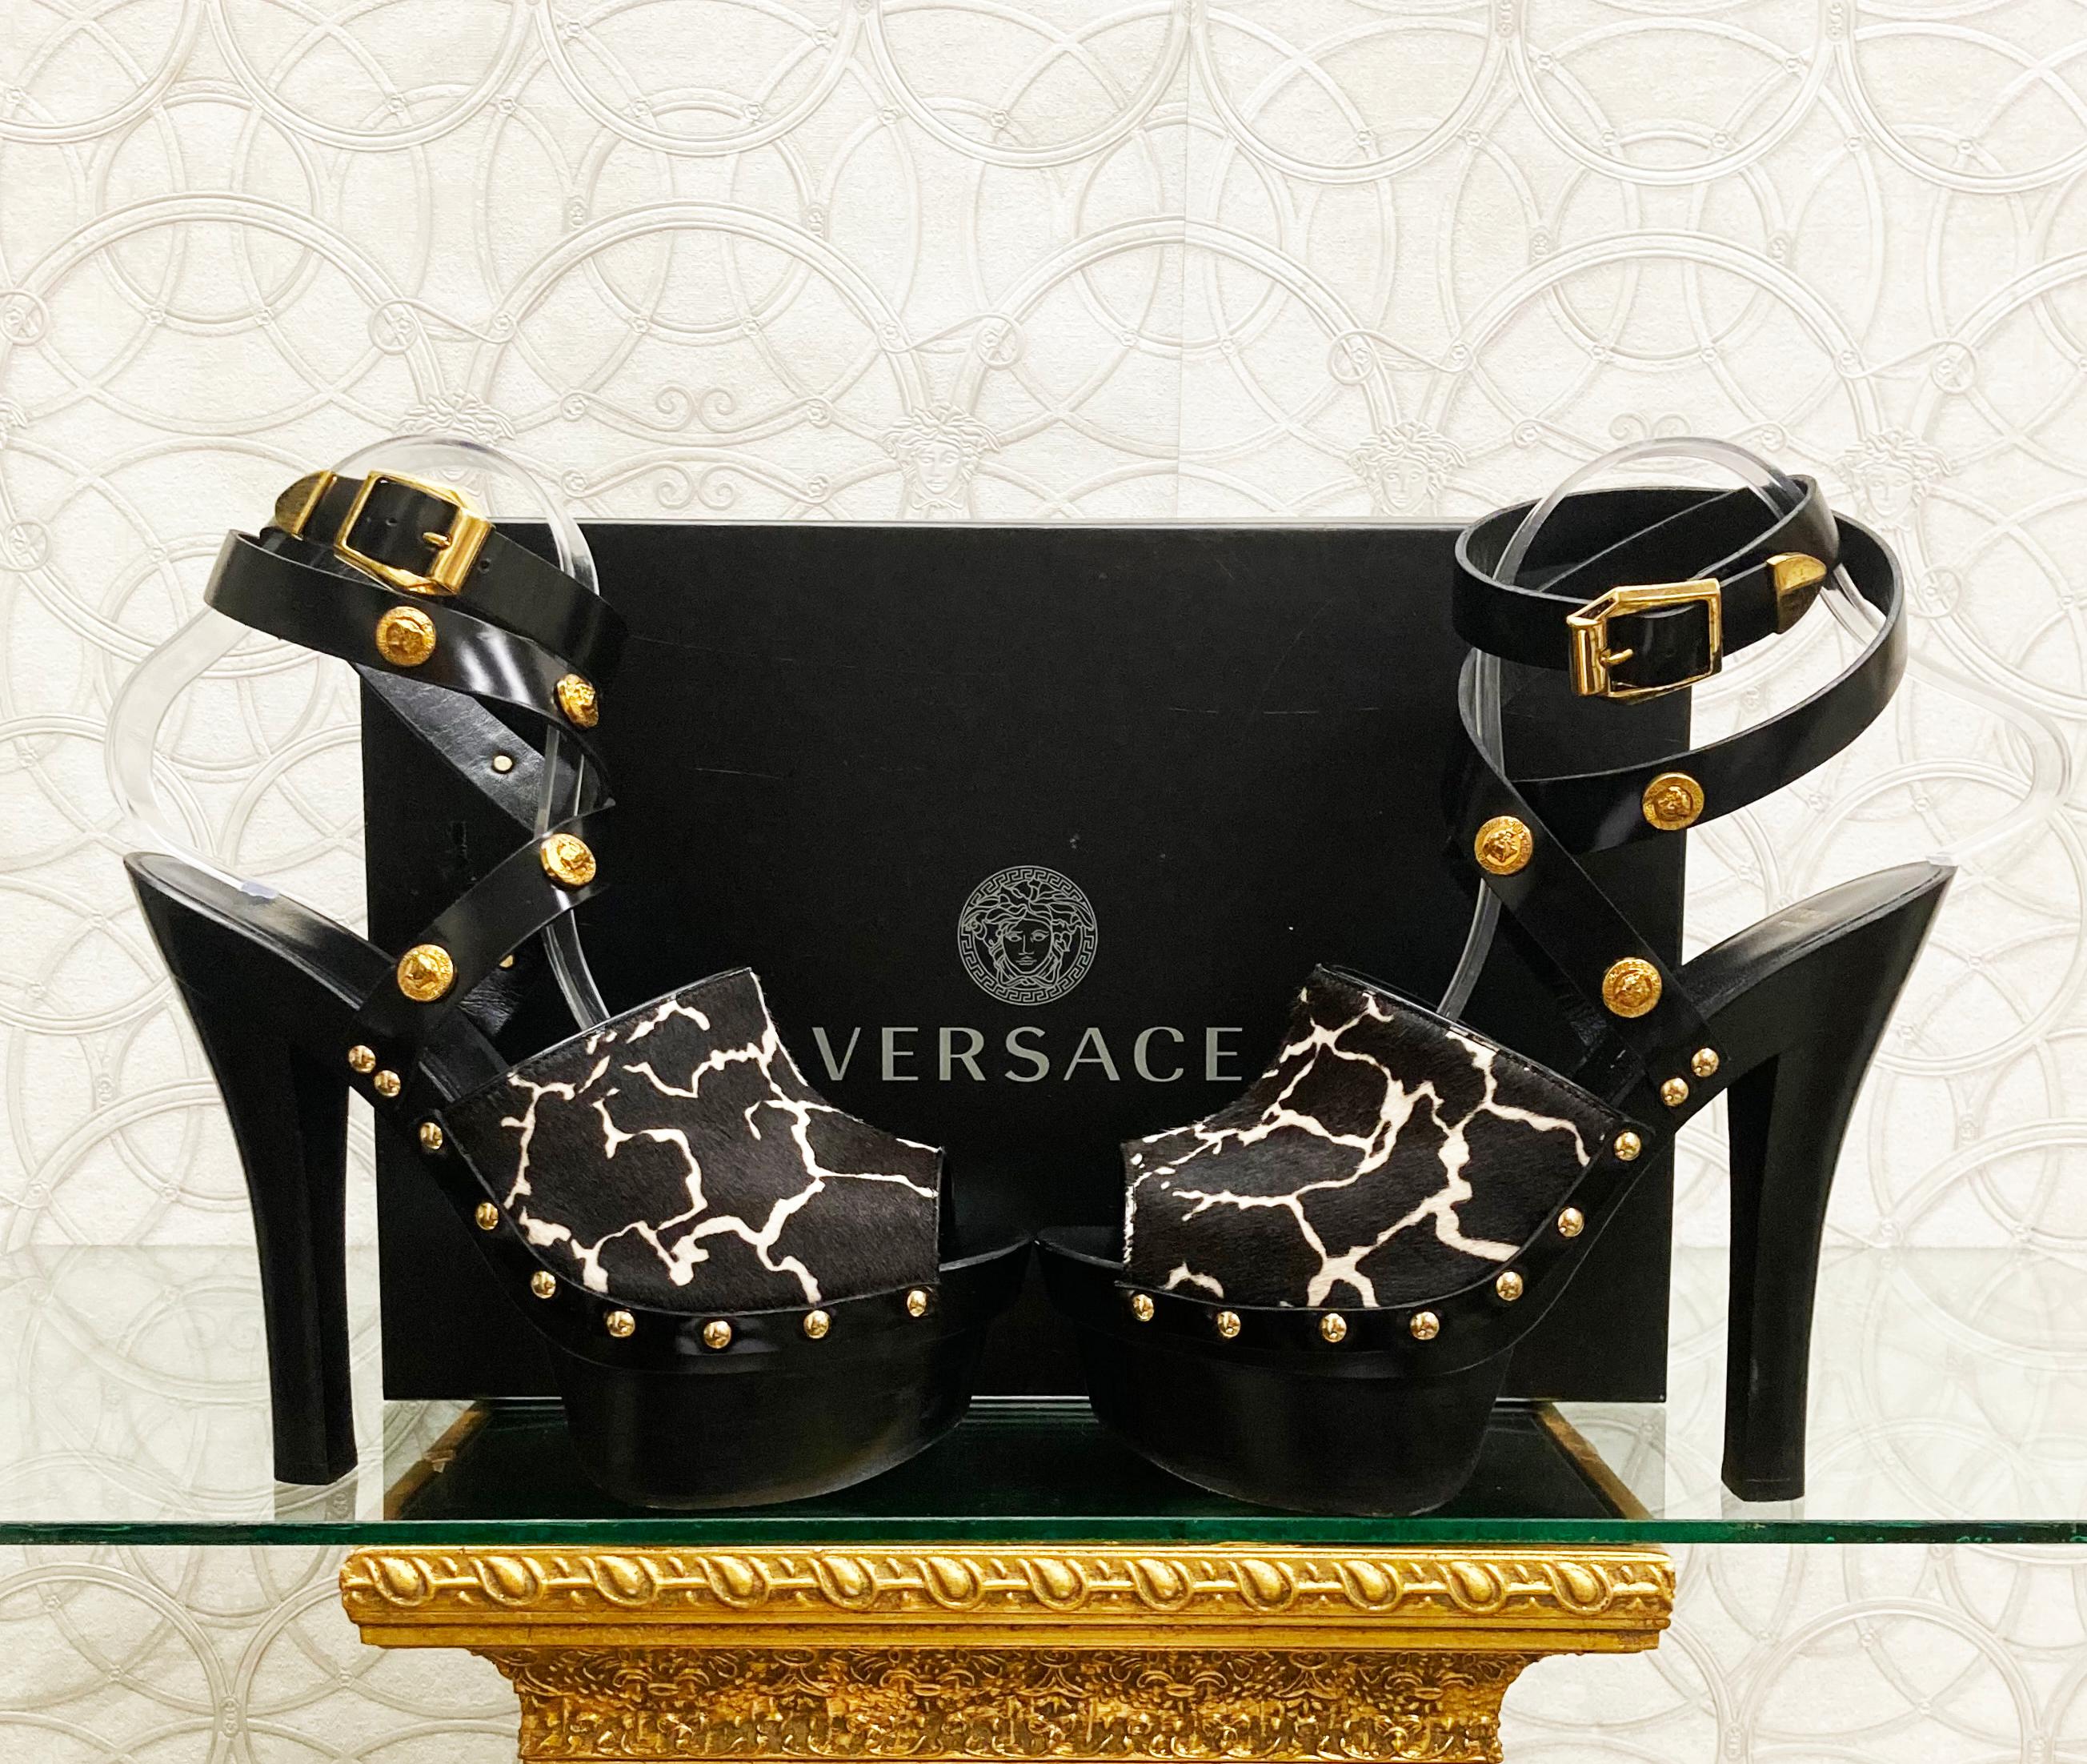 VERSACE

Dark Brown Fur Leather sandals shoes with gold Famous Medusa studs 

DETAILS:

Open toe and open heel

Buckling ankle strap closure

Content: 100% calfskin (Lining and Sole) 


   Color: Dark Brown/Black

Platform: 1 1/4